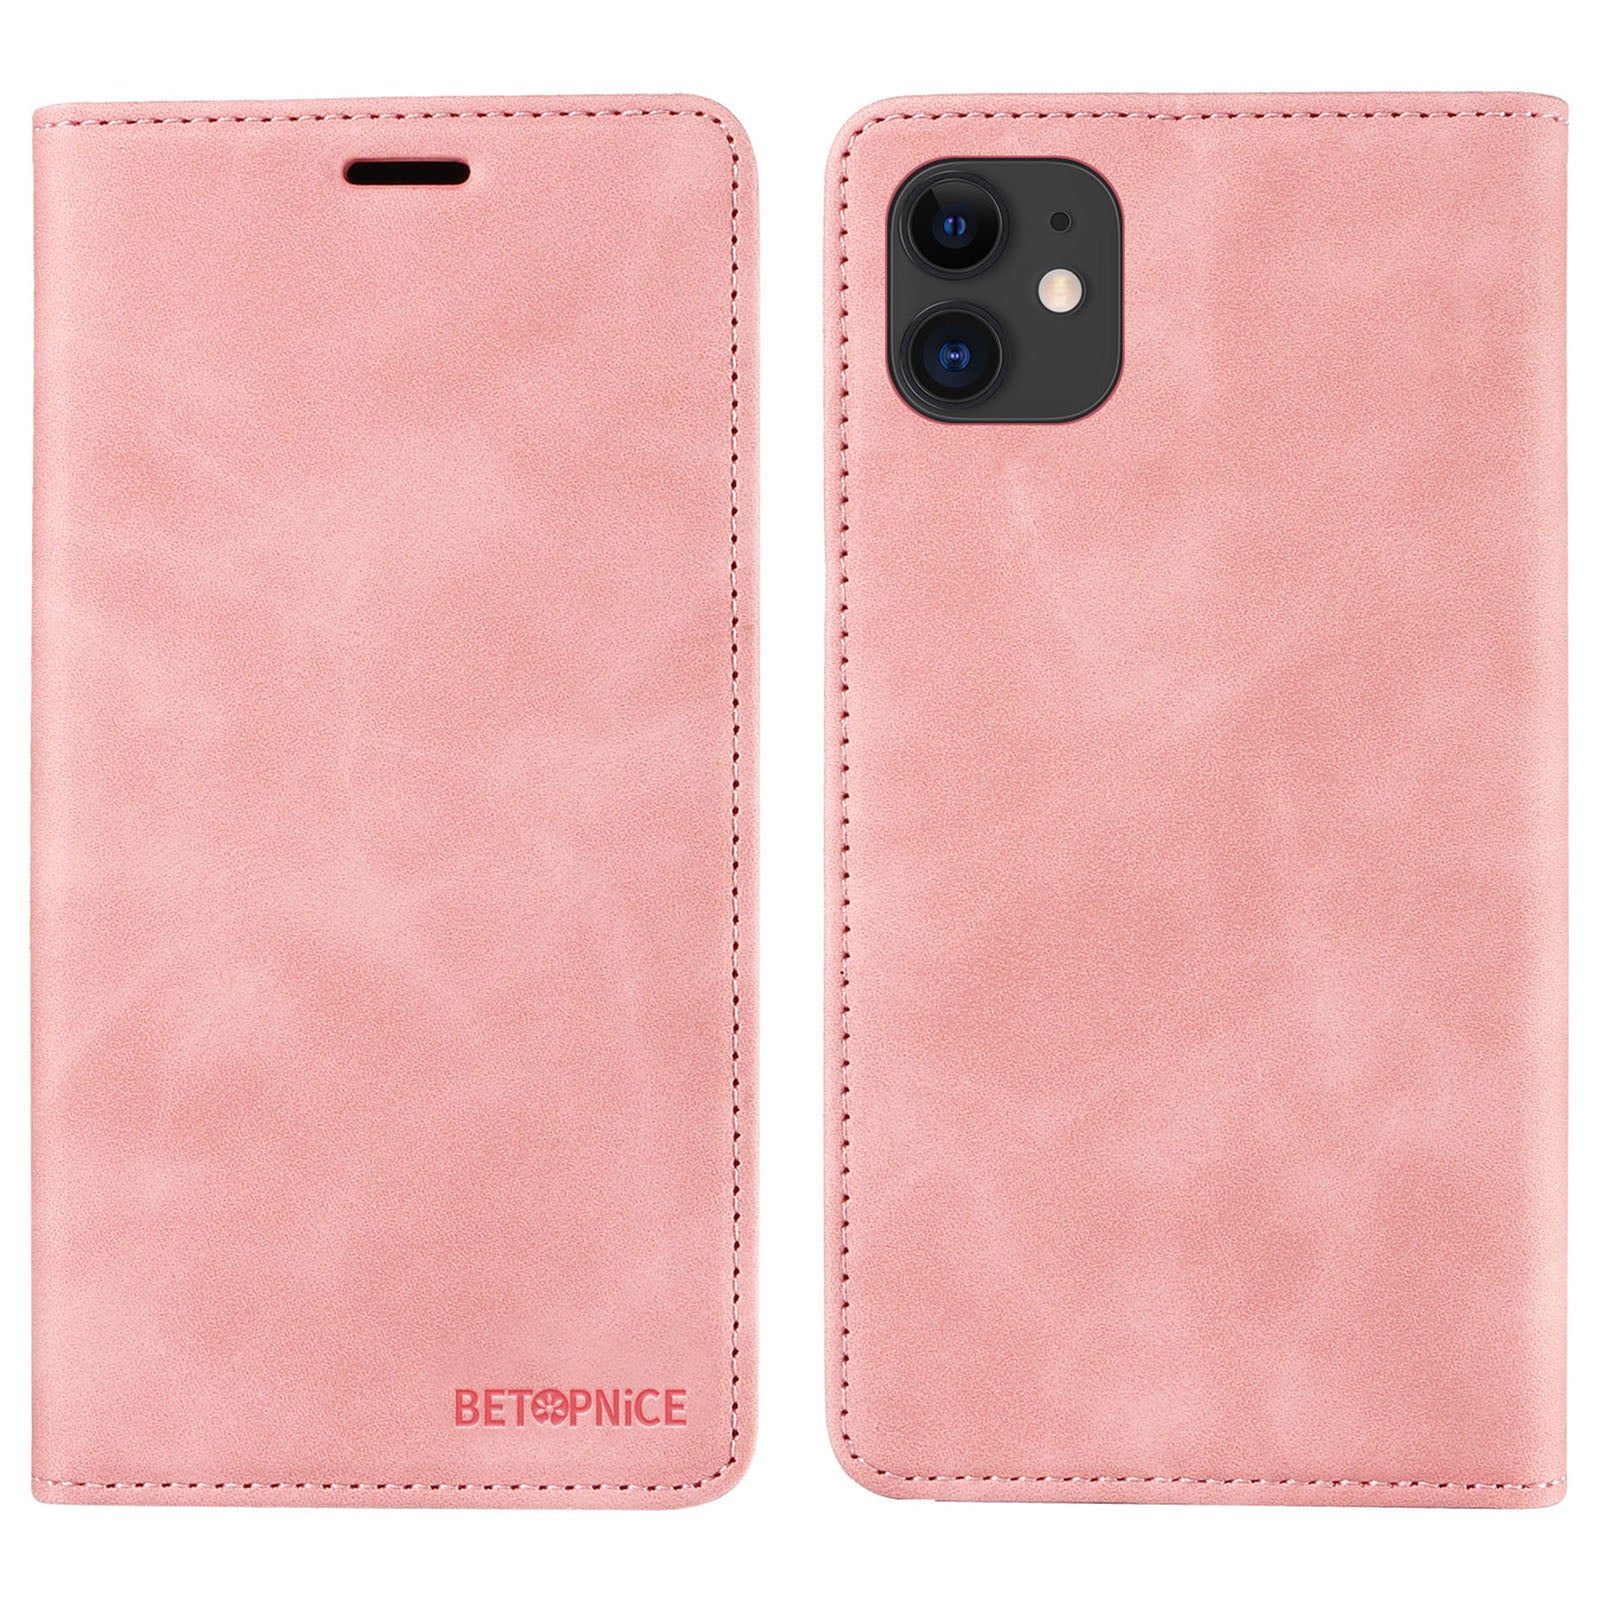 Uniqkart 003 For iPhone 12 / 12 Pro 6.1 inch Cell Phone Cover Wallet Leather Stand RFID Blocking Case - Pink